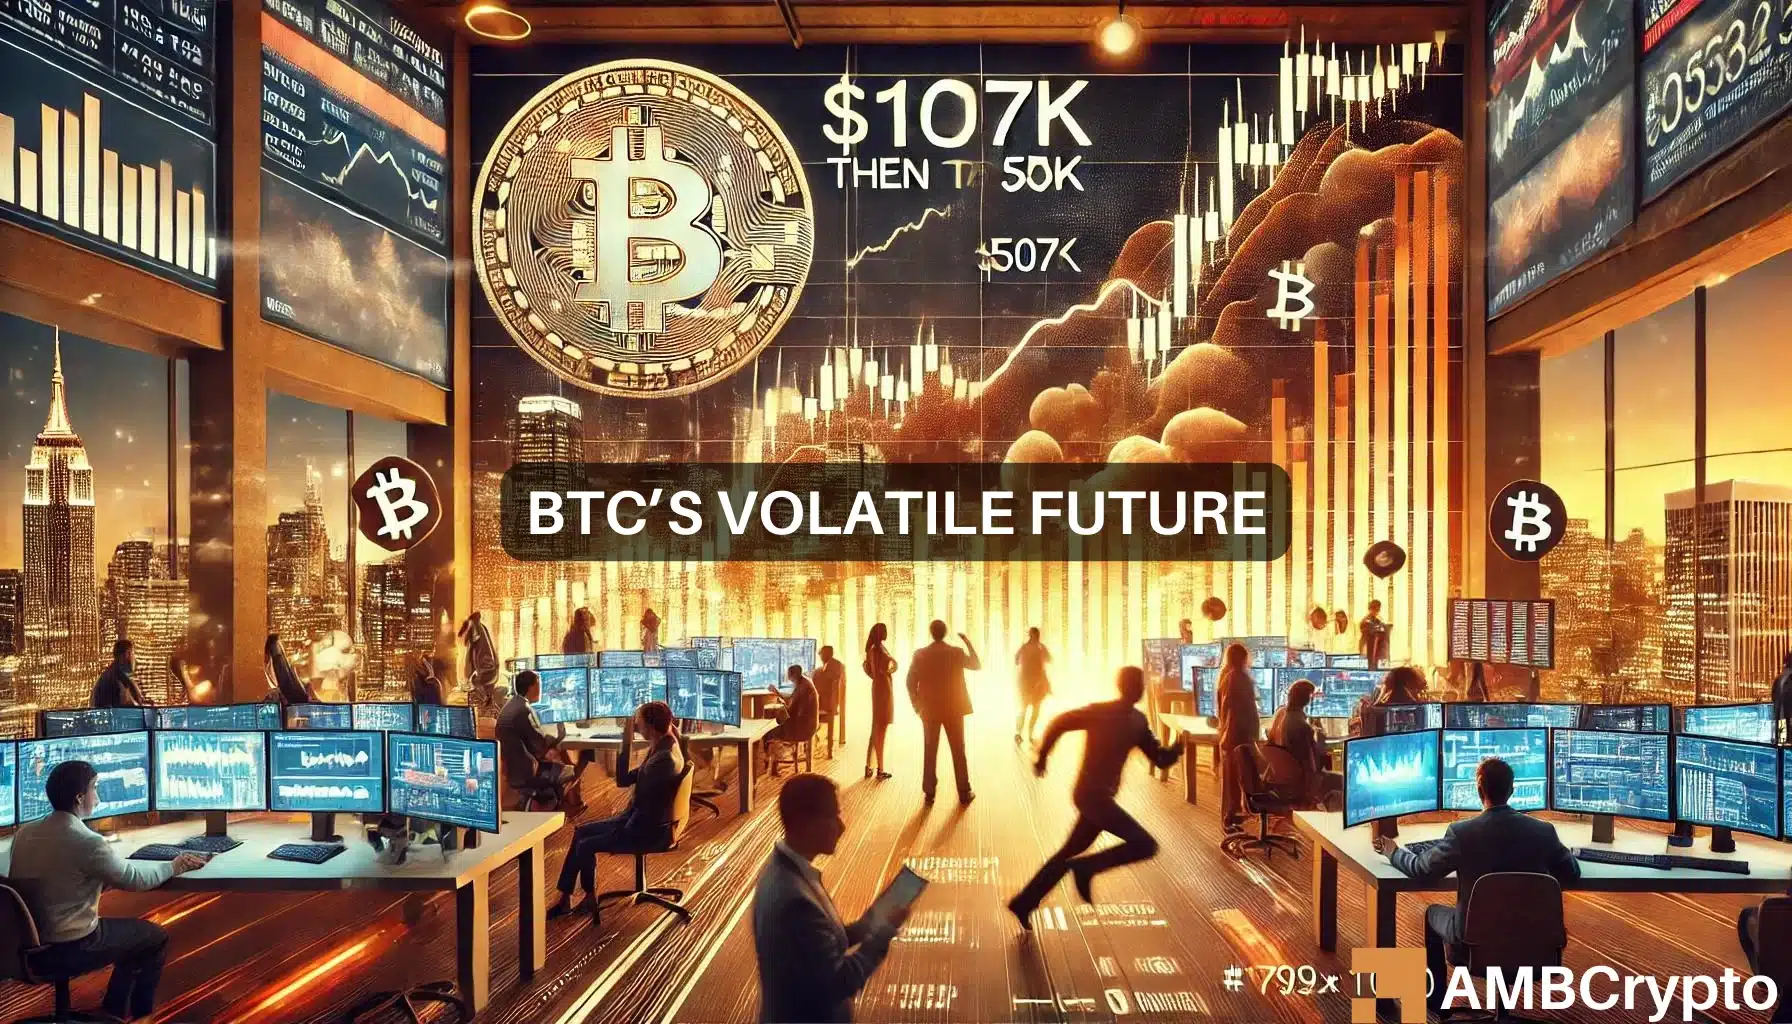 Bitcoin: $107K now, $50K after? Analysts weigh in on BTC’s future